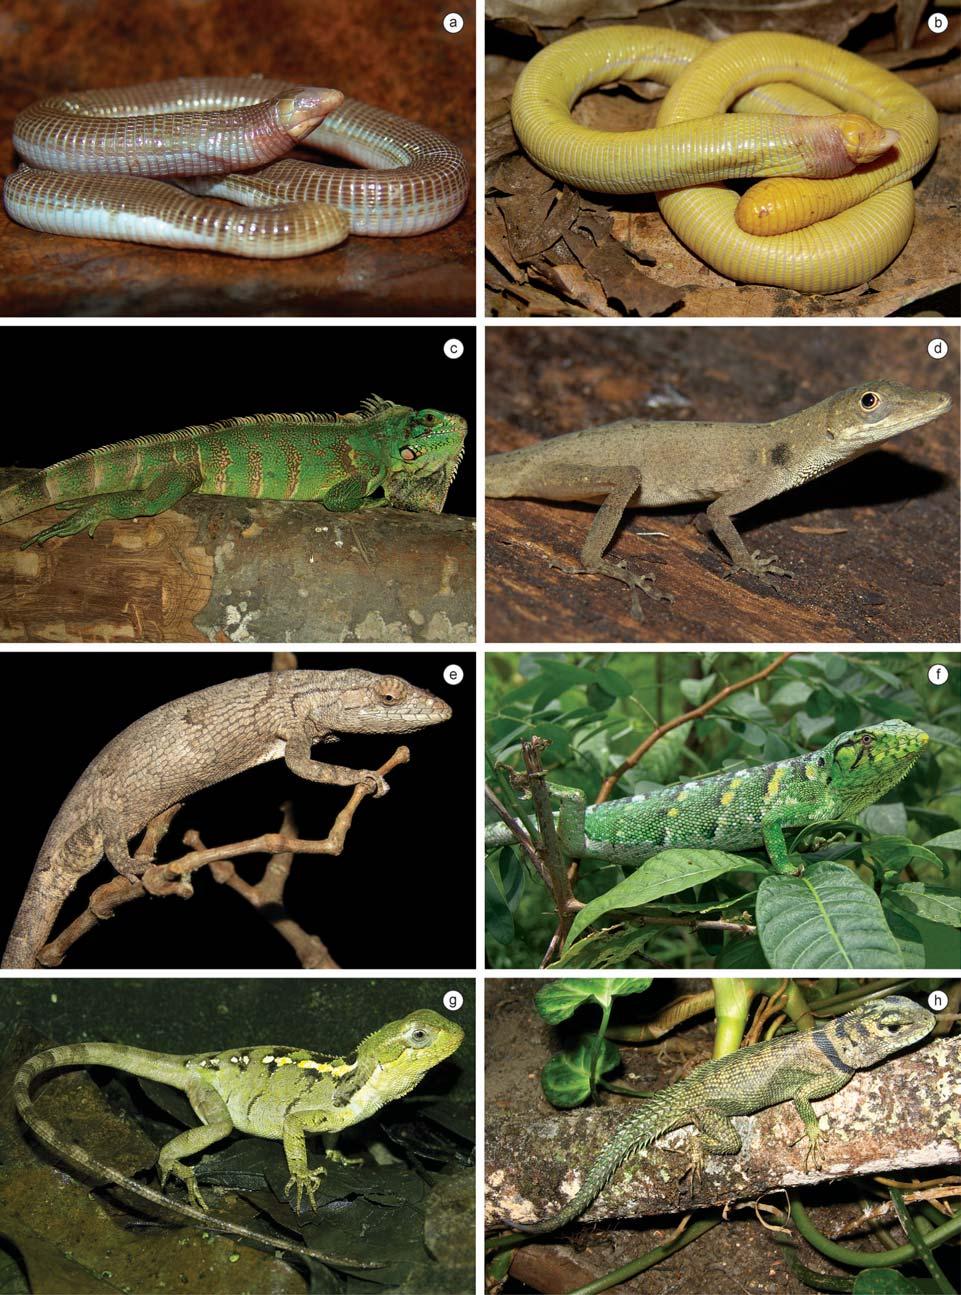 Biota Neotrop., vol. 10, no. 3 243 Amphibians and reptiles from a highly diverse area of the Caatinga domain Figure 9. Reptile species found in the region of CPI.